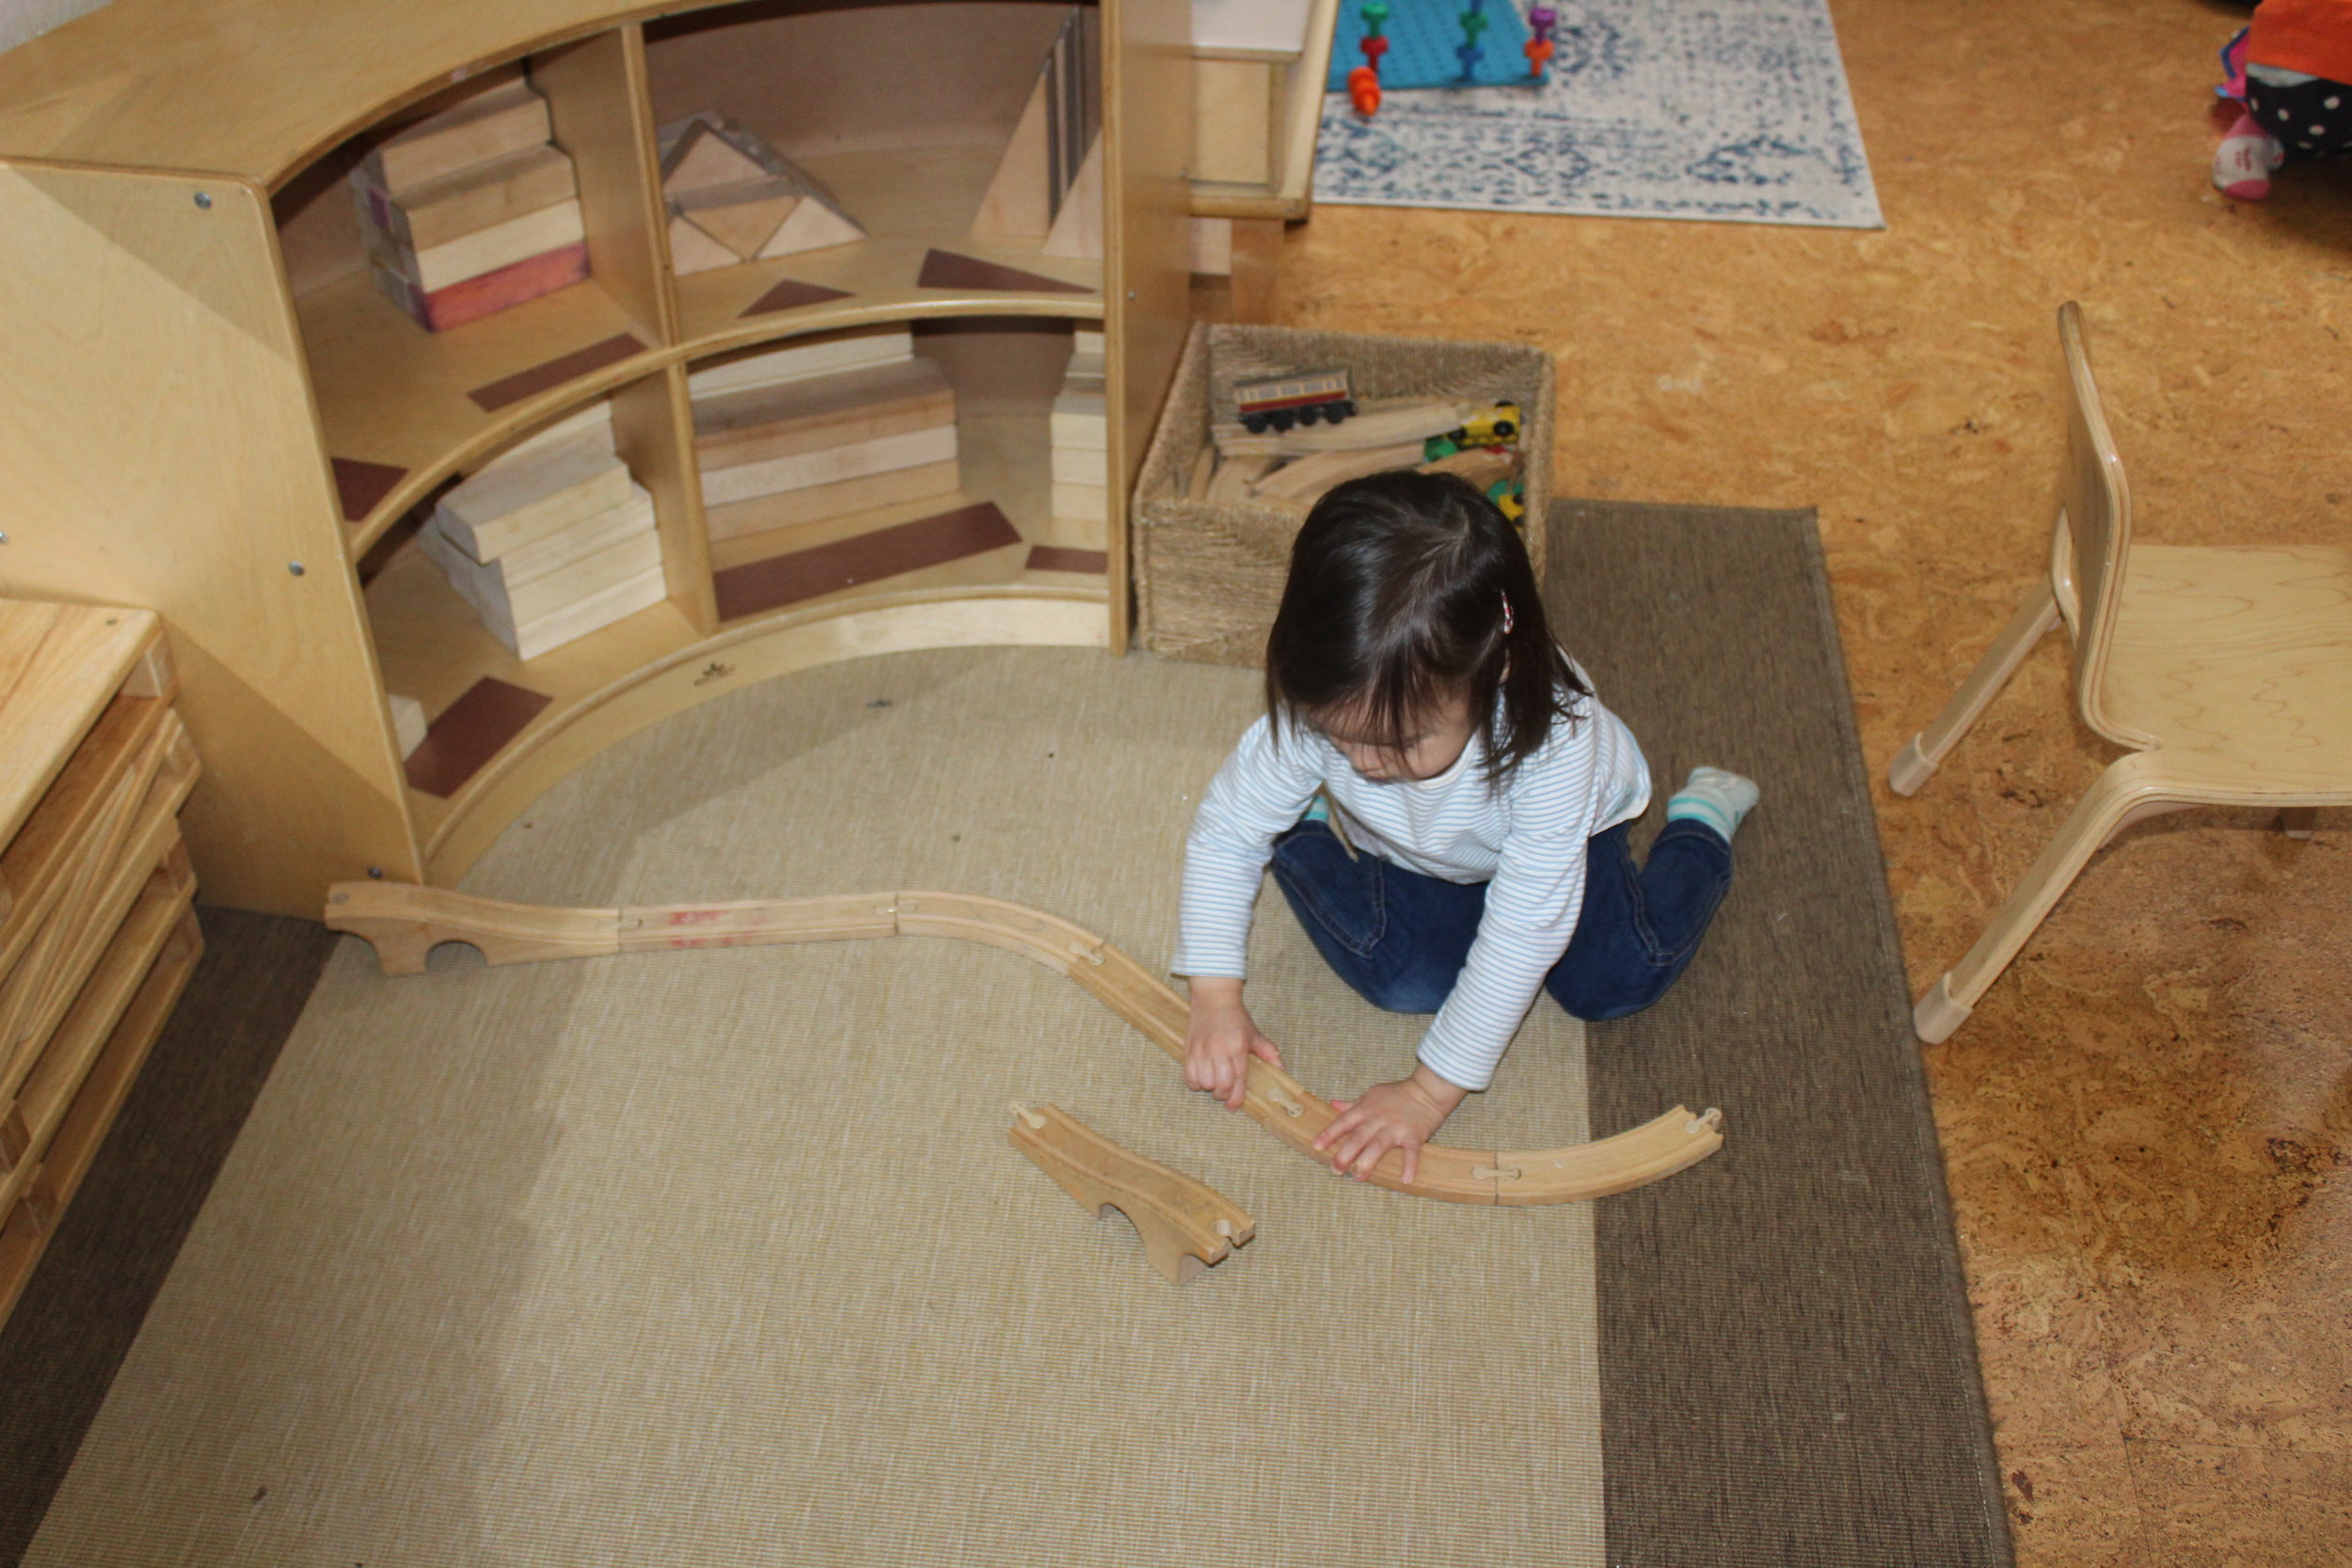  Playing with toys is an essential part of a child's development.&nbsp; The railroad system can provide an excellent stimulus for creative play.&nbsp; Train tracks are innovative; they promote problem-solving, imagination, language, socialization, an